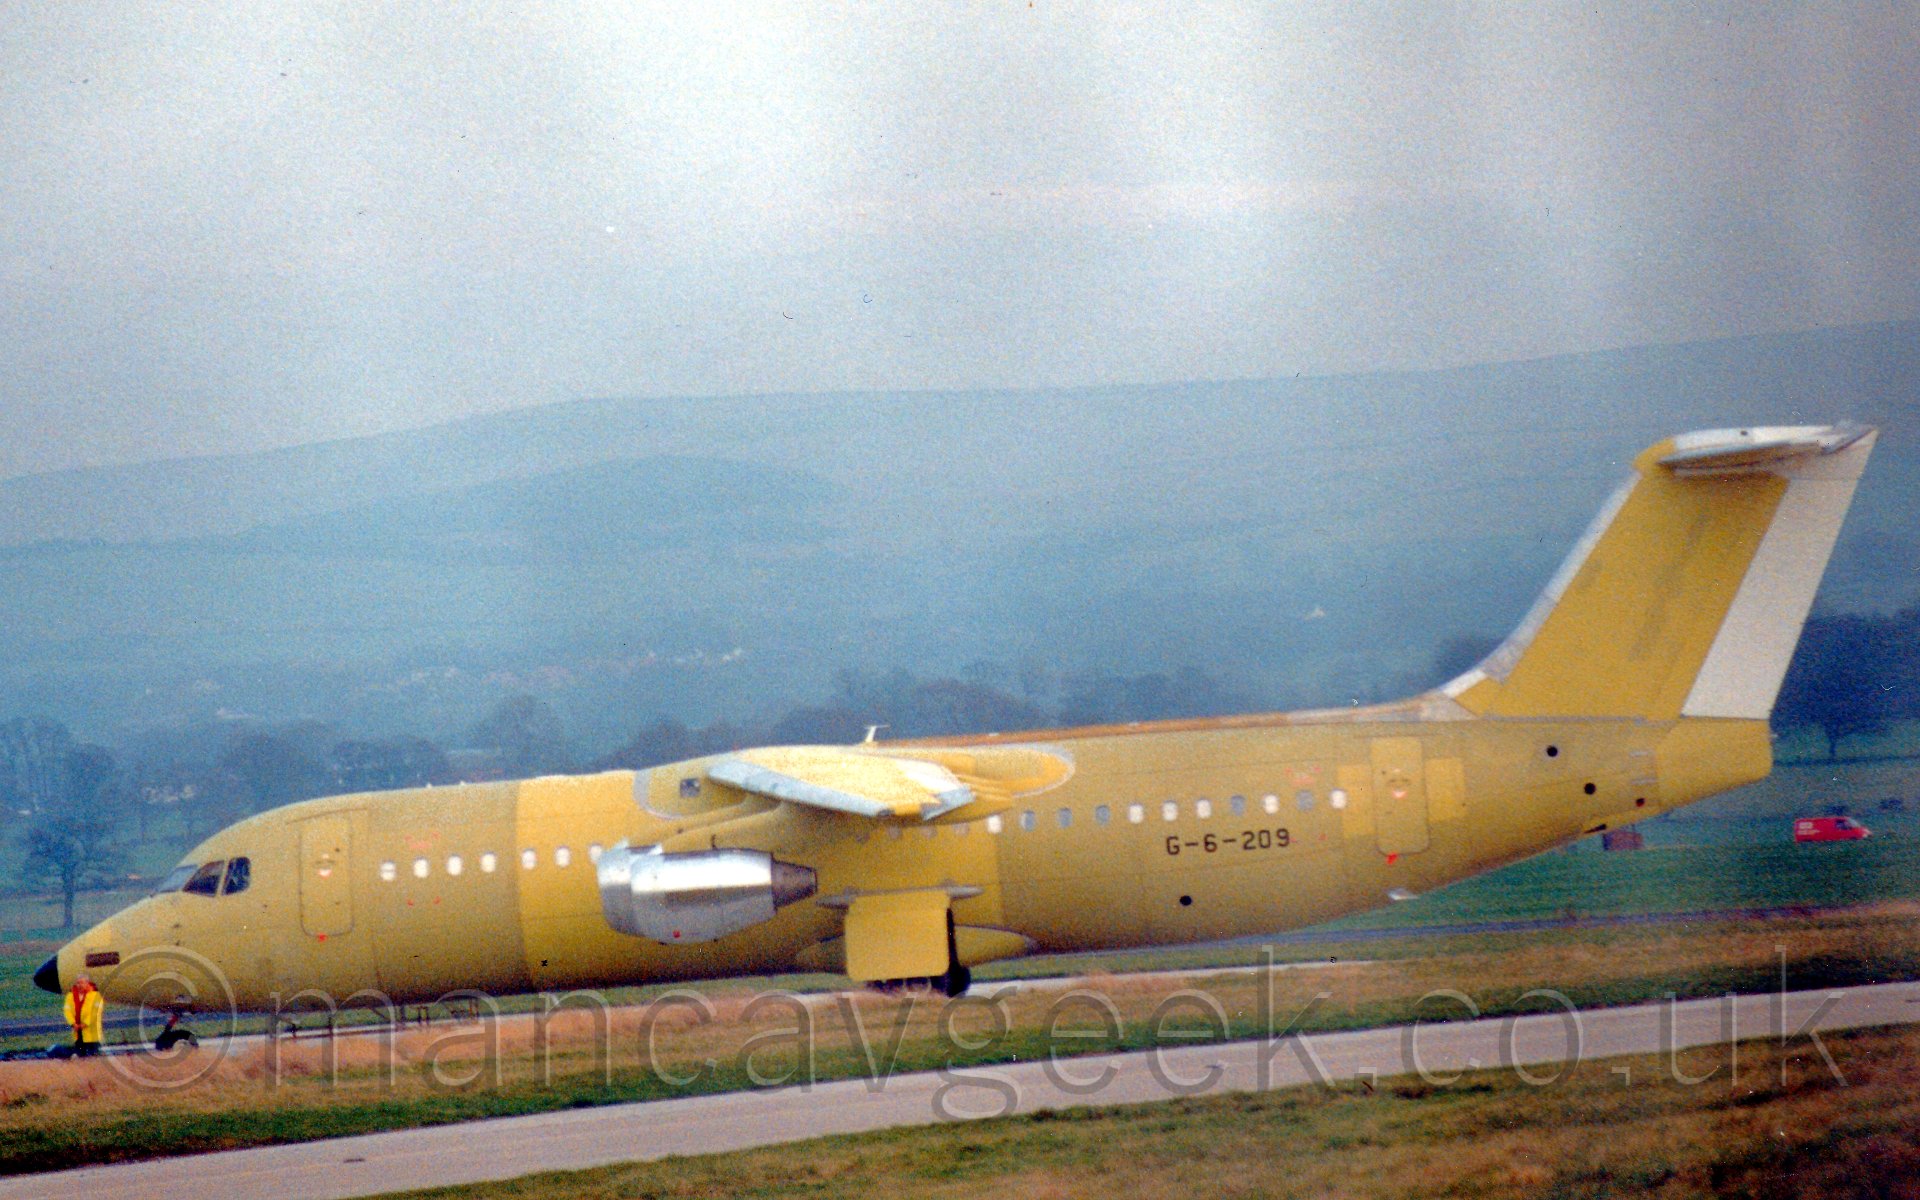 Side view of a high-winged, 4 engined jet airliner being towed from left to right. The plane is covered in a yellowish-green paint, with only the rear of the tail painted white, and silver-coloured engine pods hanging below the wings. There is a person in a yellow hi-viz jacket standing by the plane's nose cone. In the background, trees line the airfield perimeter, with a hill rising in the distance, slowly vanishing in to haze.